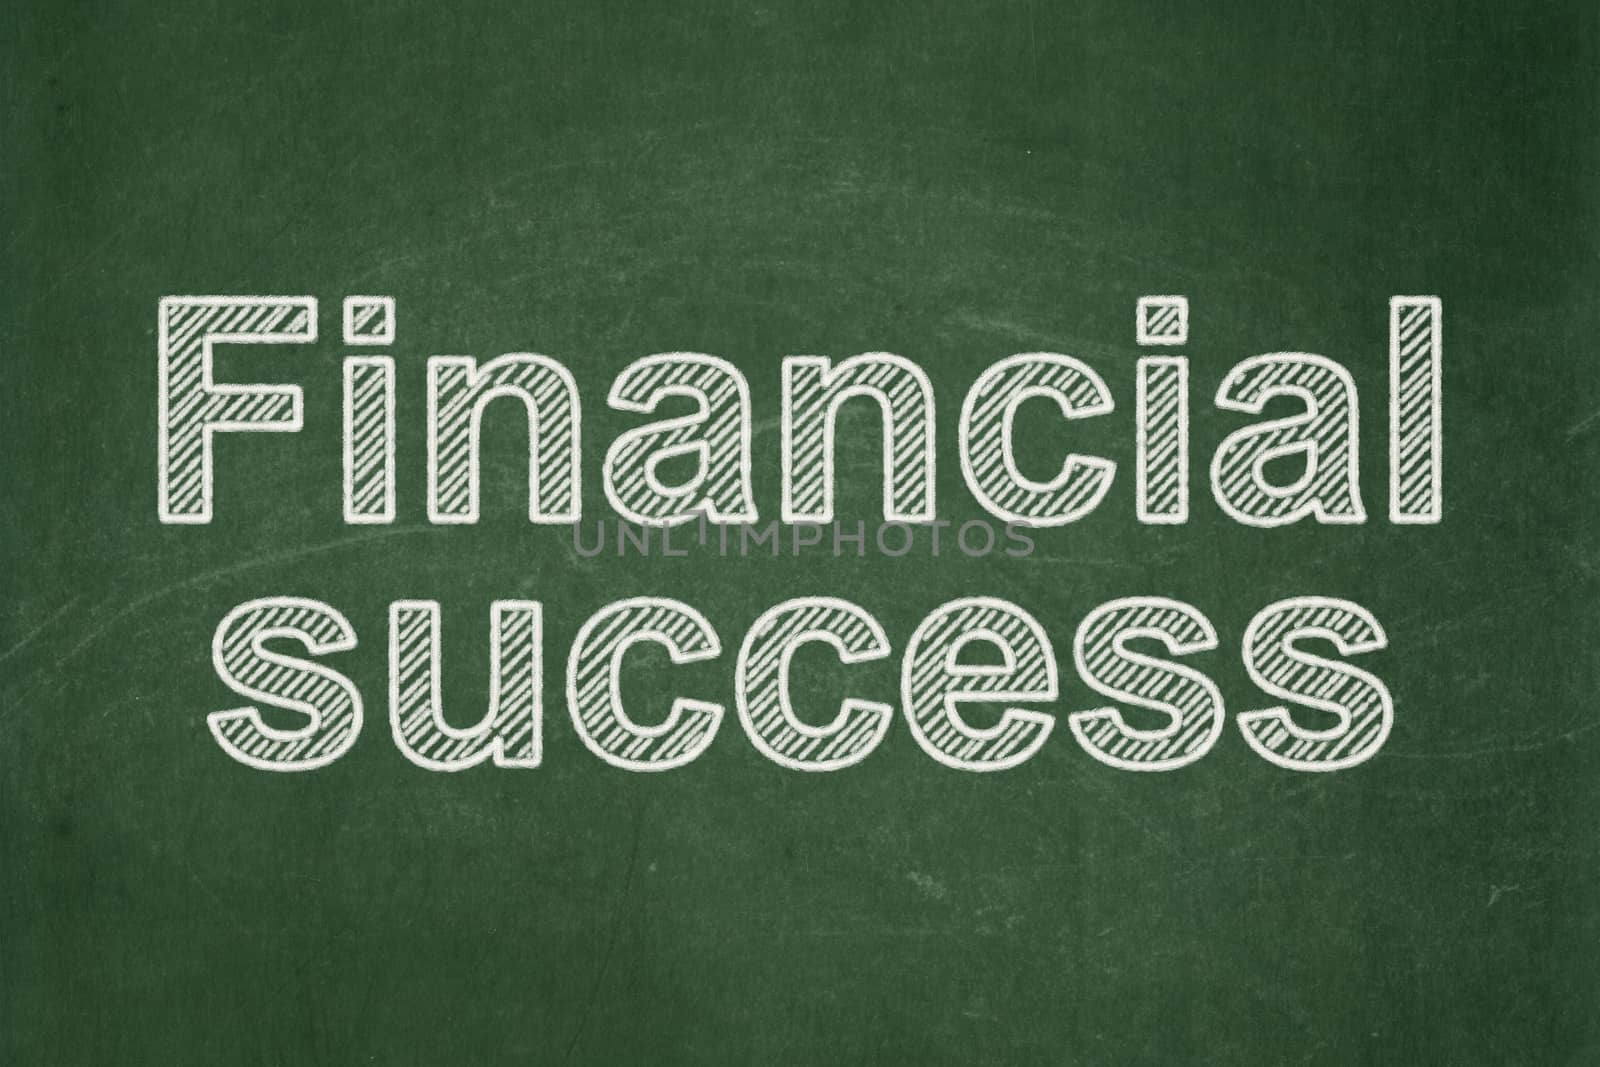 Money concept: text Financial Success on Green chalkboard background